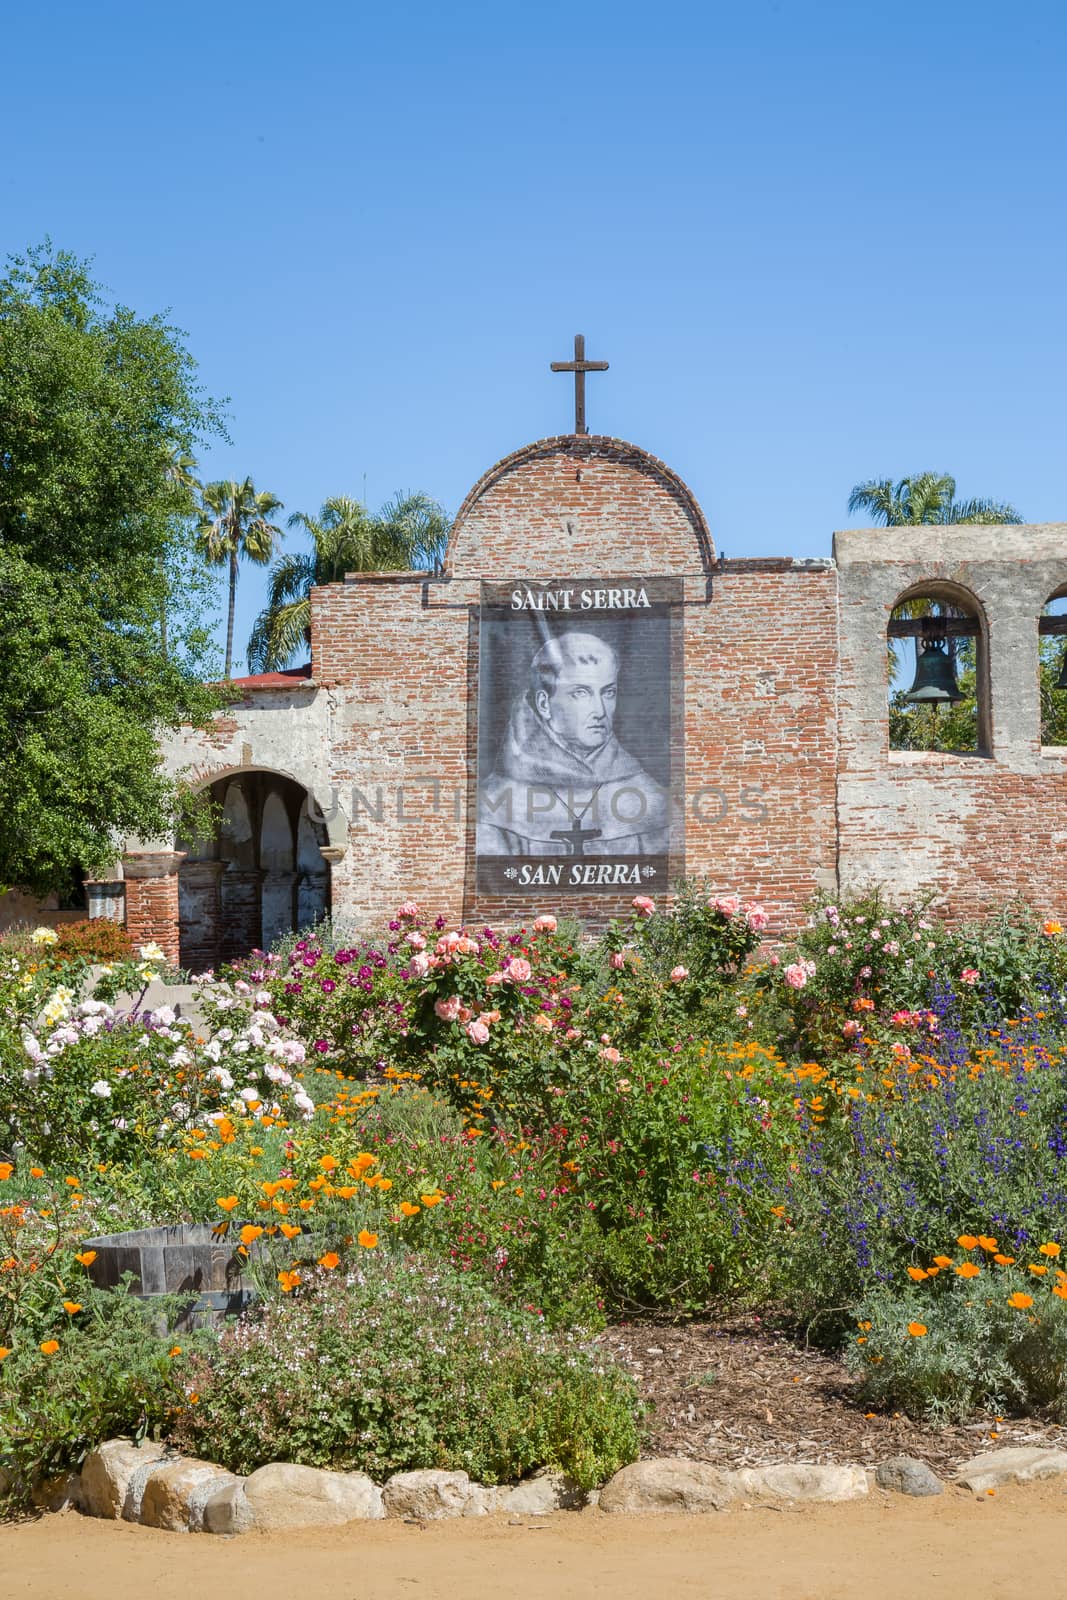 Gardens of Mission San Juan Capistrano by wolterk